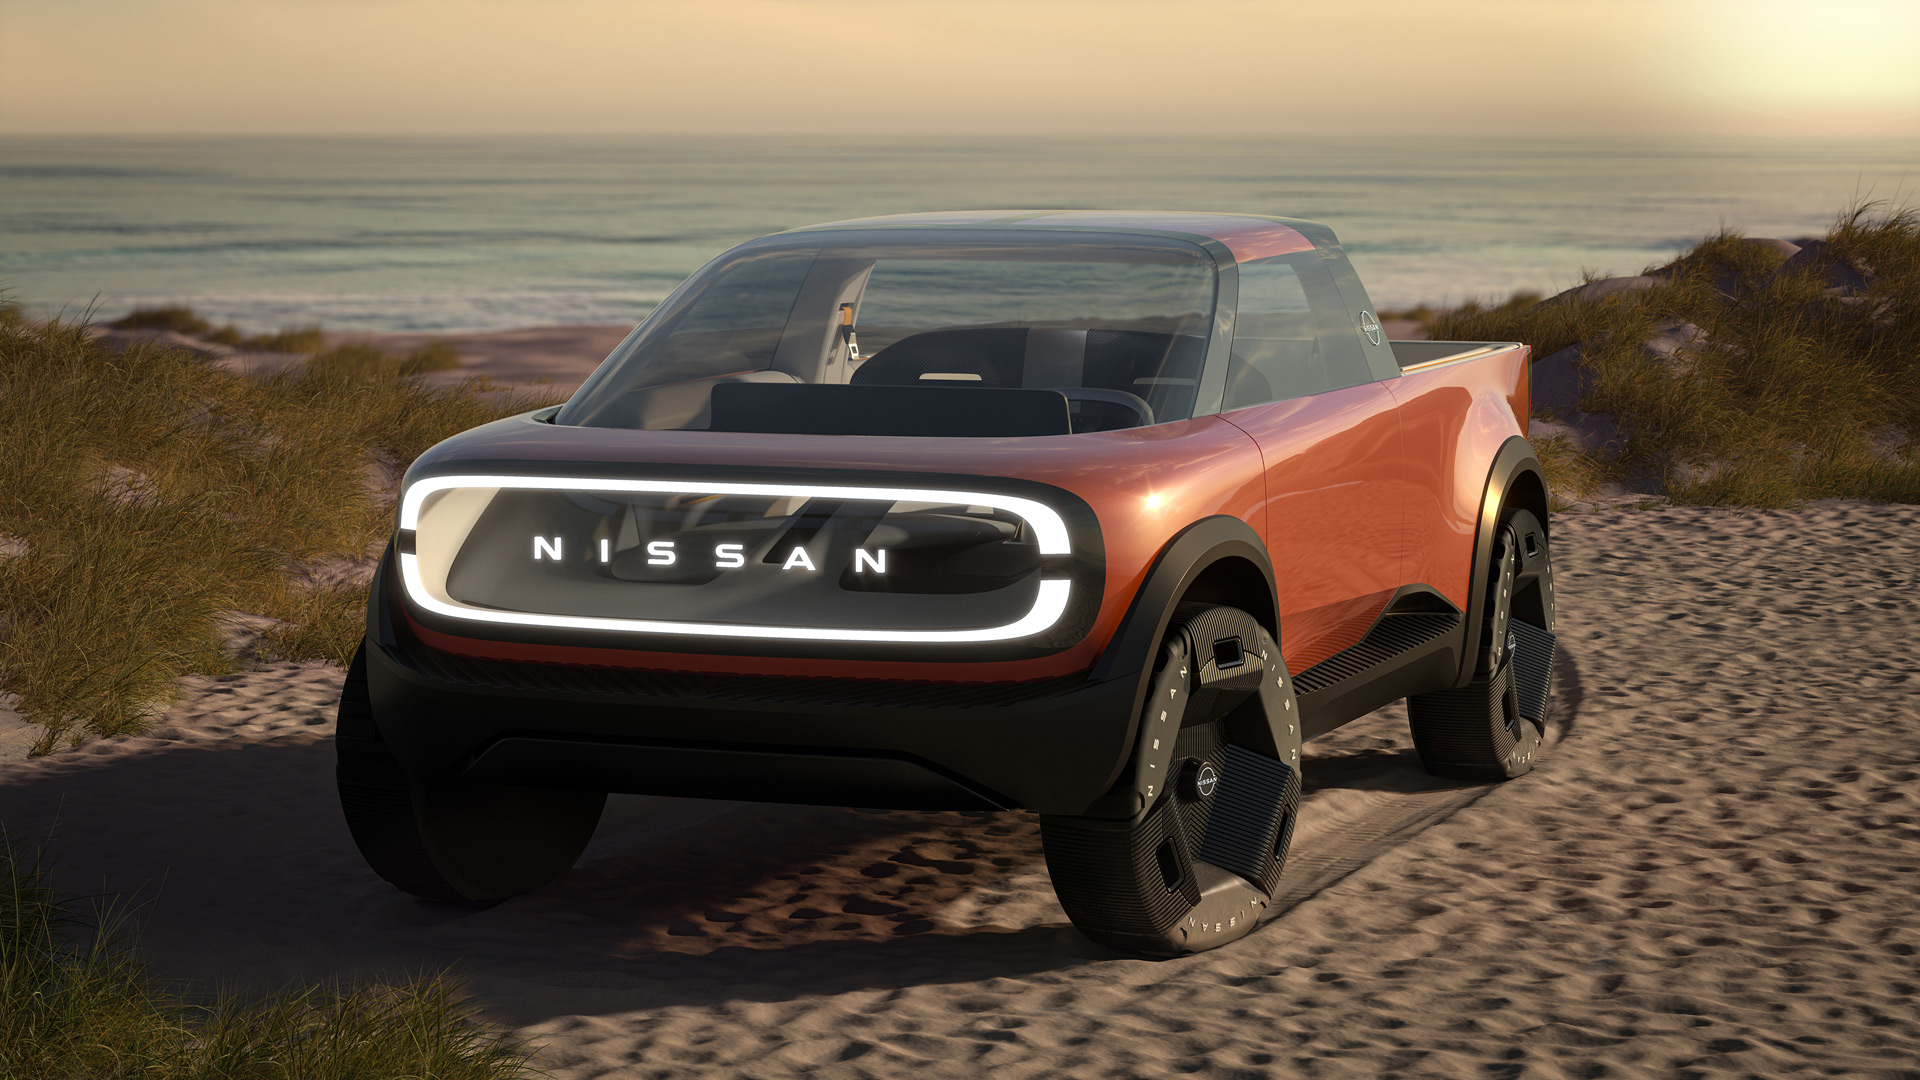 As Nissan overhauls its roadmap to EVs, is it cutting out gasoline engine development?As Nissan overhauls its roadmap to EVs, is it cutting out gasoline engine development?